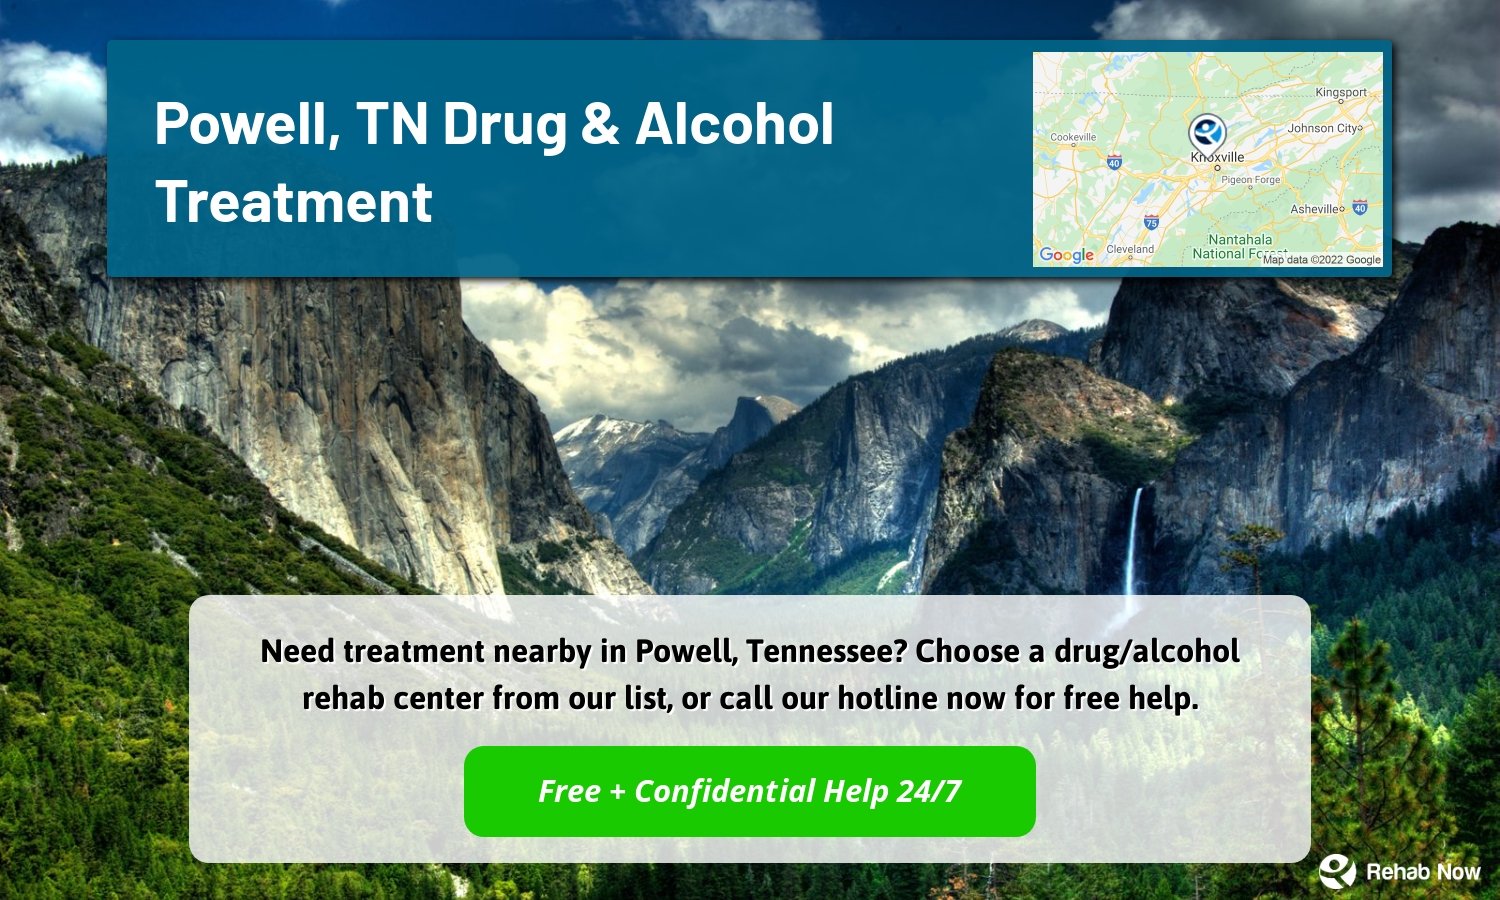 Need treatment nearby in Powell, Tennessee? Choose a drug/alcohol rehab center from our list, or call our hotline now for free help.